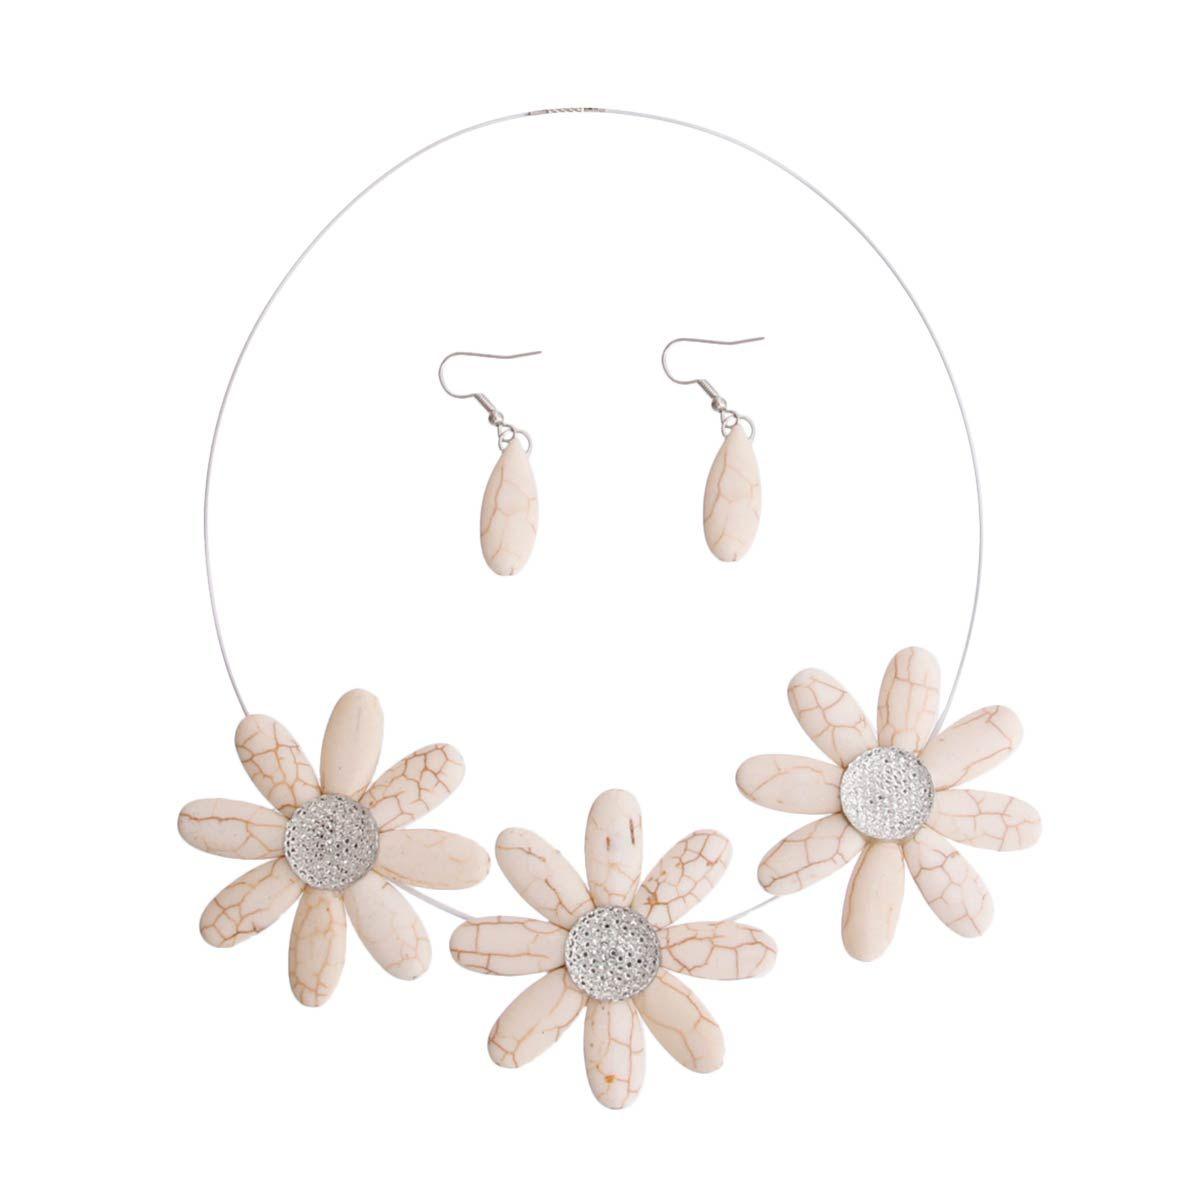 Buy Ivory-color Daisy Necklace Set - Perfect Accessory for Summer